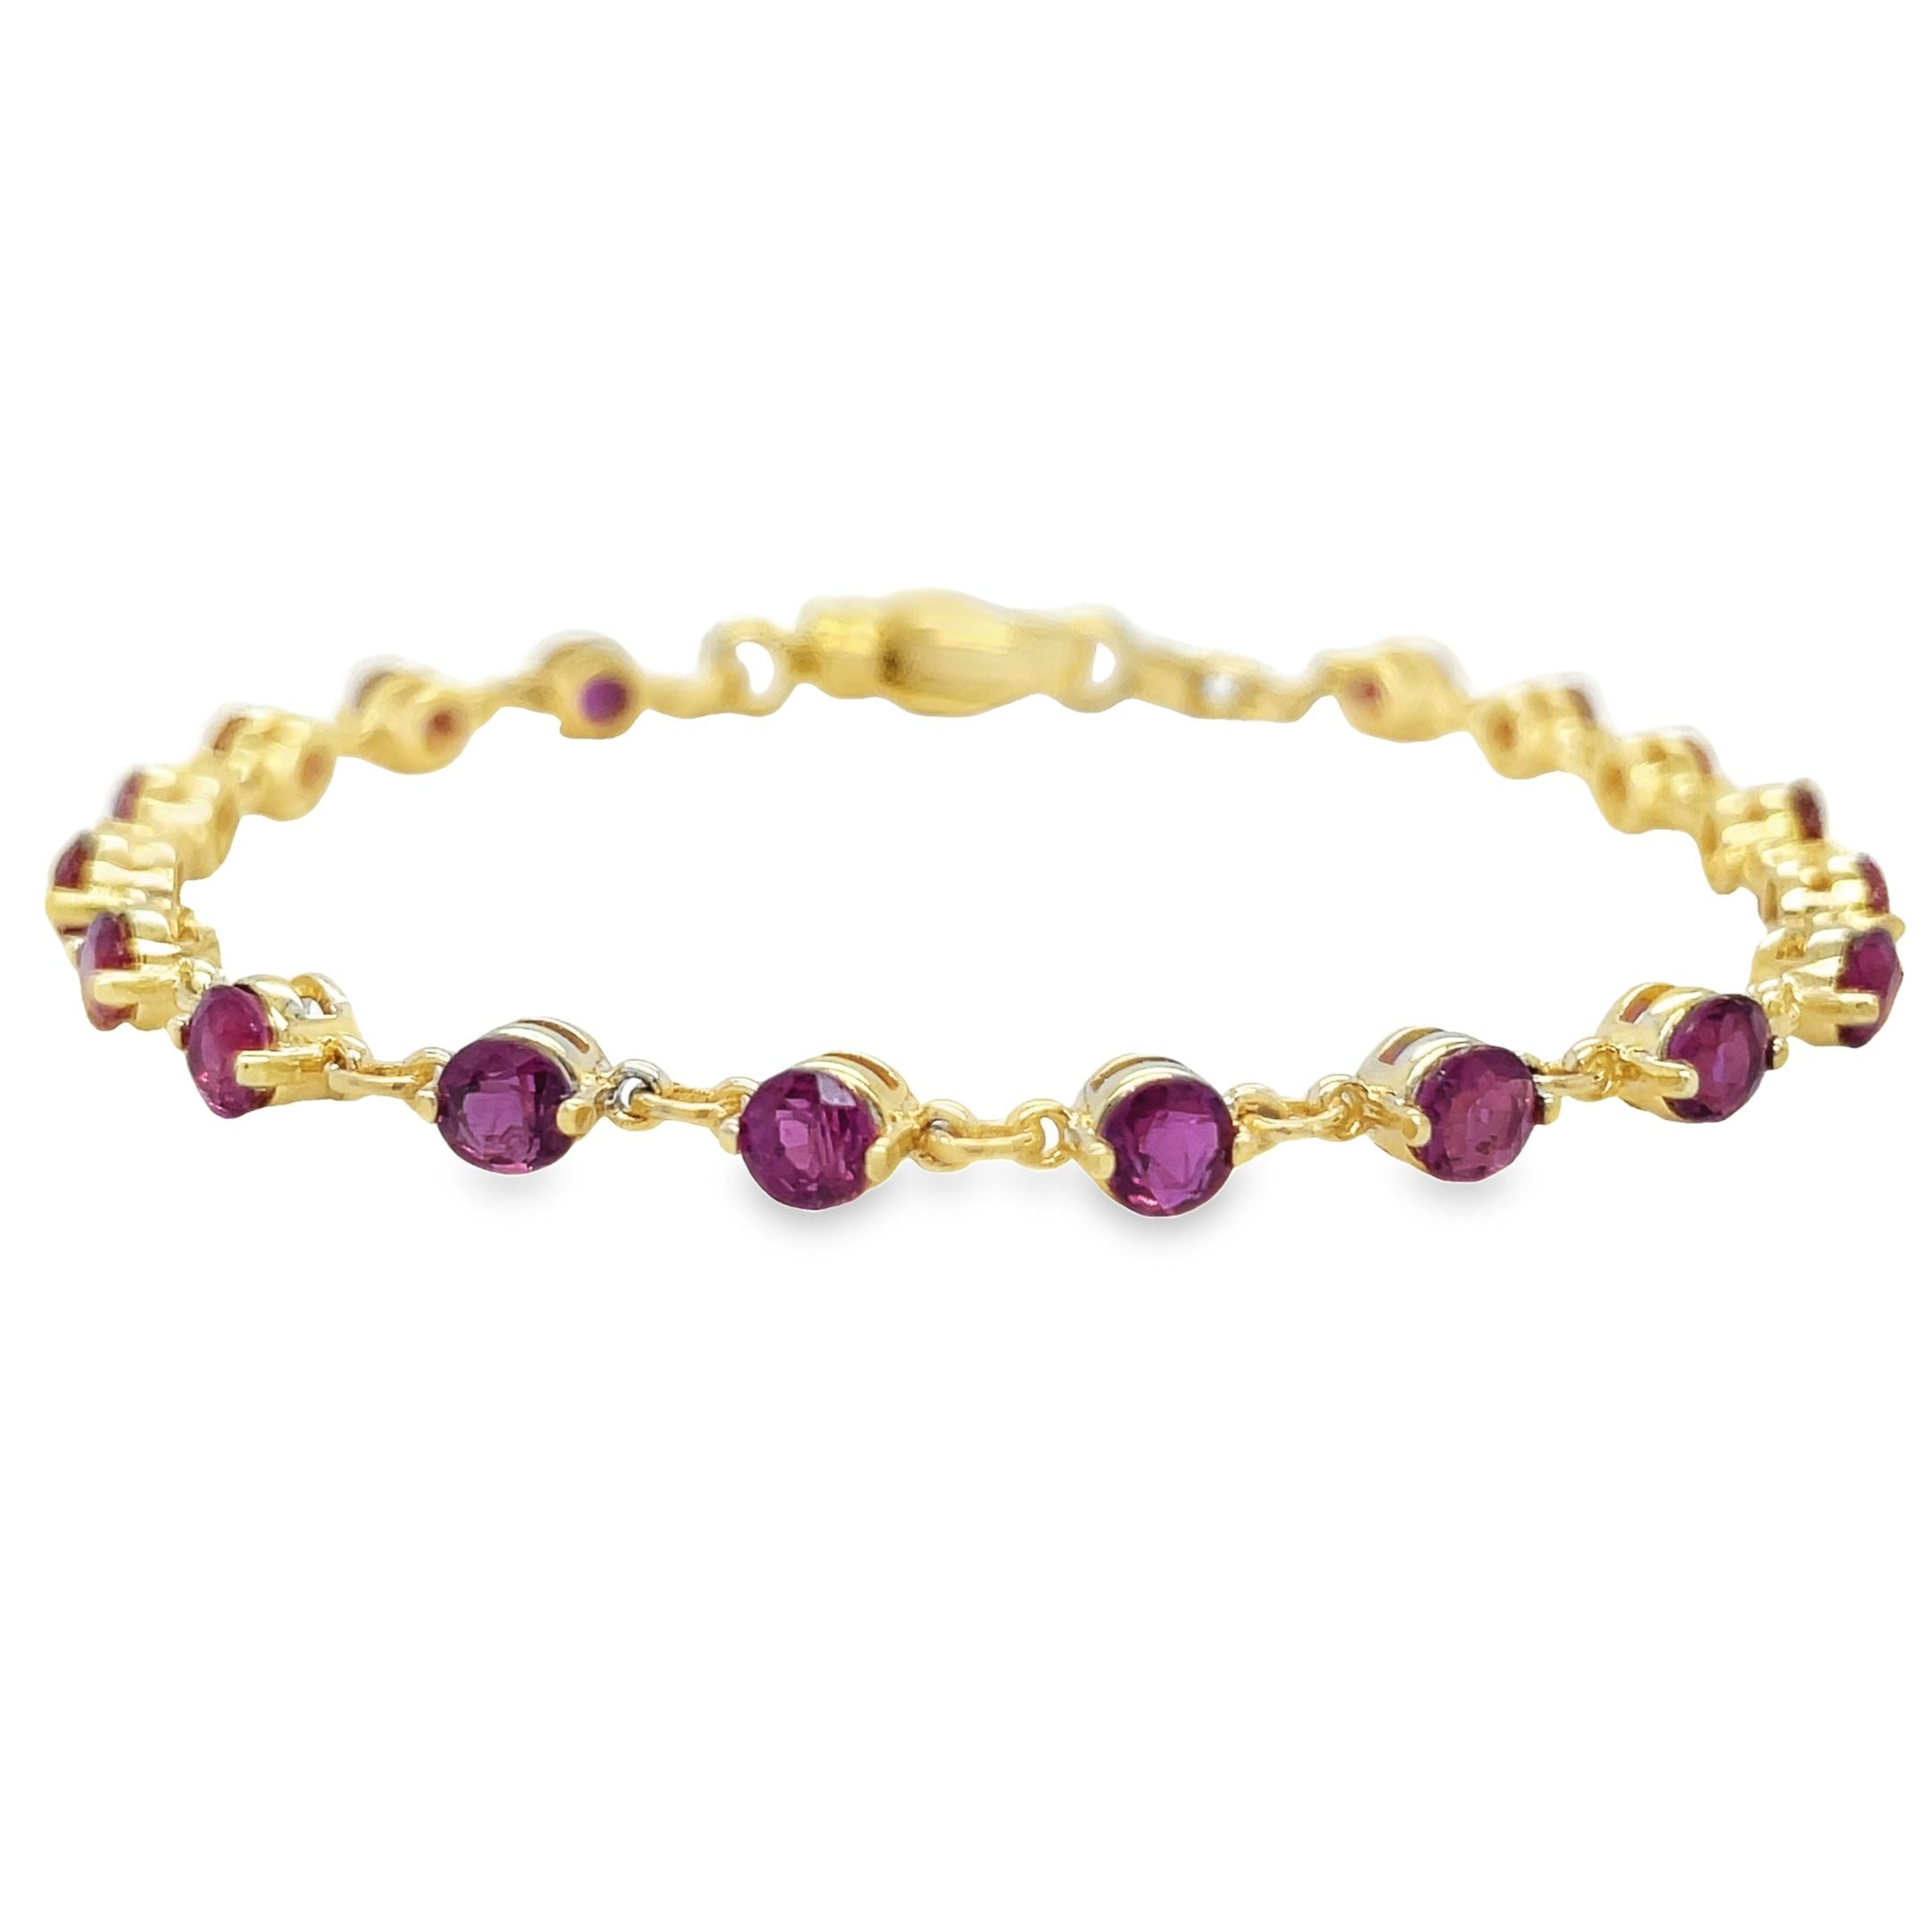 This Ruby Yellow Gold Bracelet features a sparkling round ruby weighing 3.60 carats. The 14k yellow gold setting is both elegant and durable, while the secure lobster catch ensures this bracelet stays comfortably on your wrist at 7" long. Enhance your look with this stunning piece.